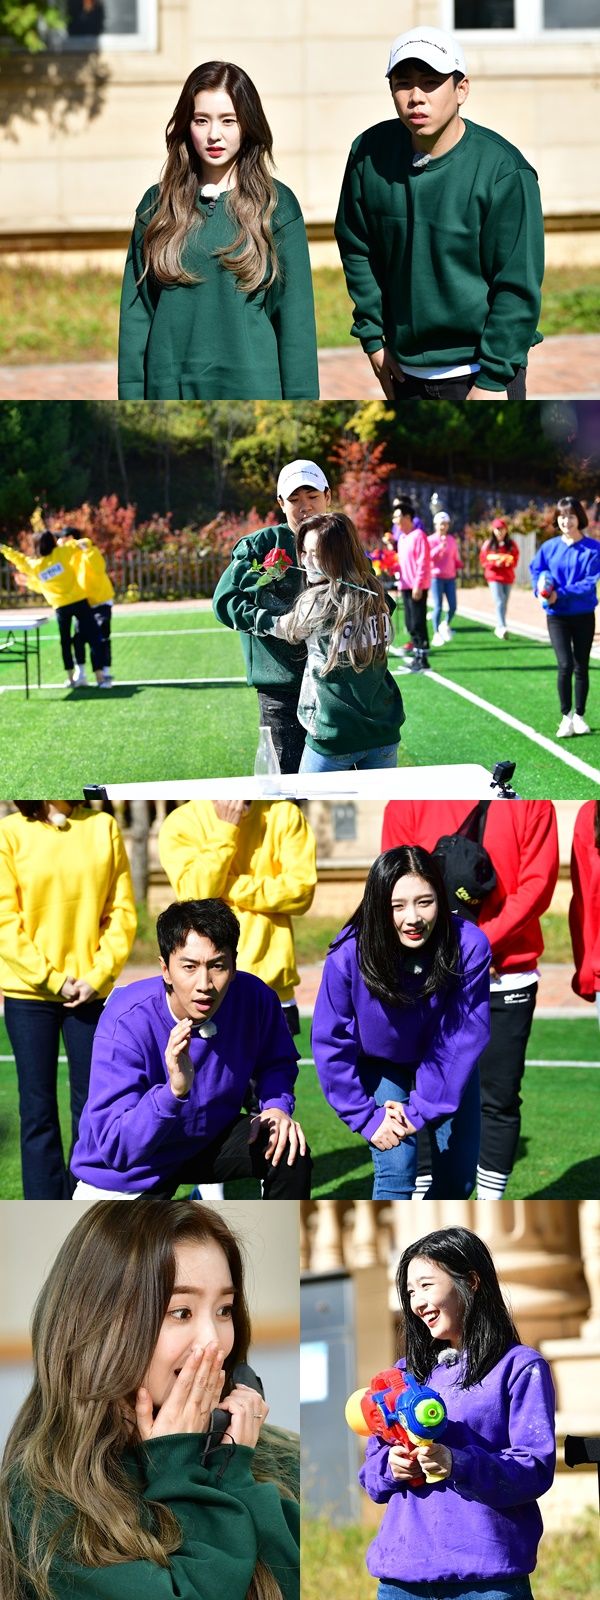 REDVelvet Irene and Joy play a big role in Running Man.On SBS Running Man to be broadcast on the 25th, following the last broadcast, Irene, Joy, actor Kang Han-na and Seol In-ah will be featured in the Knowing Pair race.Yang Se-chan, who has been attracting attention with Irene and shocking synthetic photos in the last broadcast, said, (Oh! Oh! Ill put you in a warm place!(Lin) Lin! I was cheered by everyone, receiving the choice of Irene for the boiler three-way.After the broadcast, netizens also praised Yang Se-chans three-way poems, saying, Samhaeng Sense Big!, Yang Se-chan was hard-carrying and Boiler Couples Birth, and expressed expectations for an unexpected Boiler Couple.In Running Man, which will be broadcast on the 25th, Irene and Yang Se-chan will play a couple.At the time of the actual shooting, REDVelvet Irene and Joy captured the members with the charm of drama and drama.Irene laughed at the members by calling them pretty Ji Suk-jin with the charm of walking My Way without understanding the rules late or bowing to the surrounding situation.On the other hand, Joy became a Chain Reaction rich man who laughed at the members words and responded immediately, and the members added, Joy is like a balloon at the venue because Chain Reaction is so big.Irene X Joys play and play will be released at Running Man, which will be broadcast at 4:50 pm on the 25th.